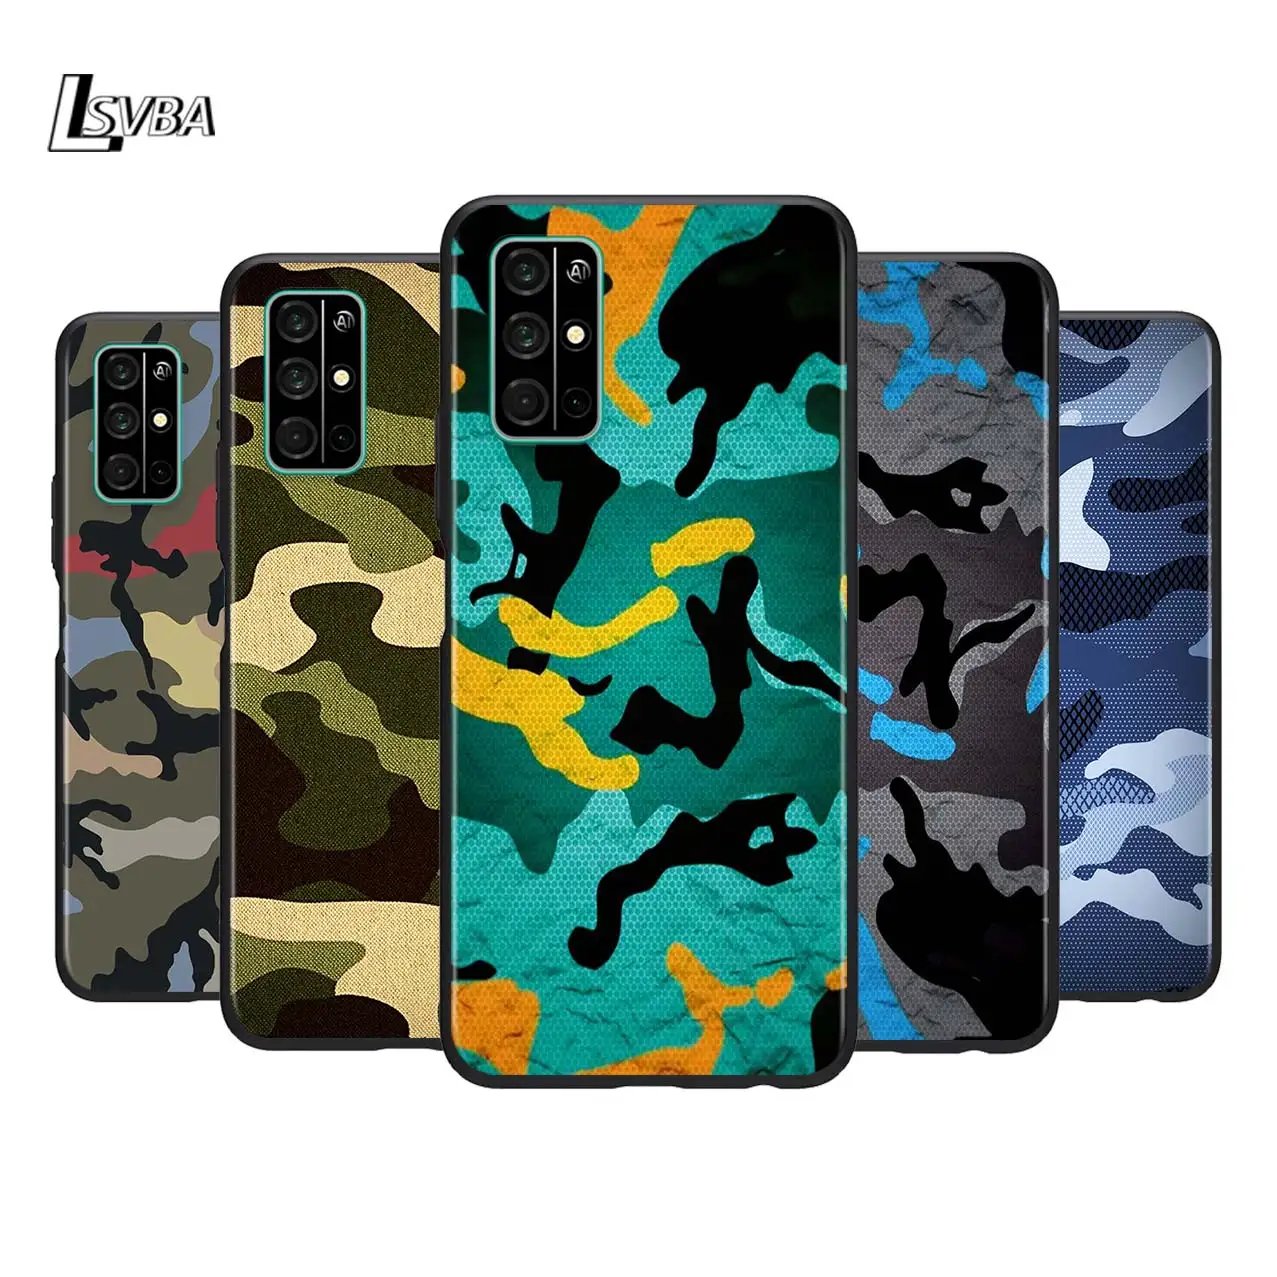 

Camouflage cool for Huawei Honor V30 V20 Pro X10 9S 9A 9C 9X 8X 10 9 Lite 8 7 Pro Silicone Soft Black Phone Case